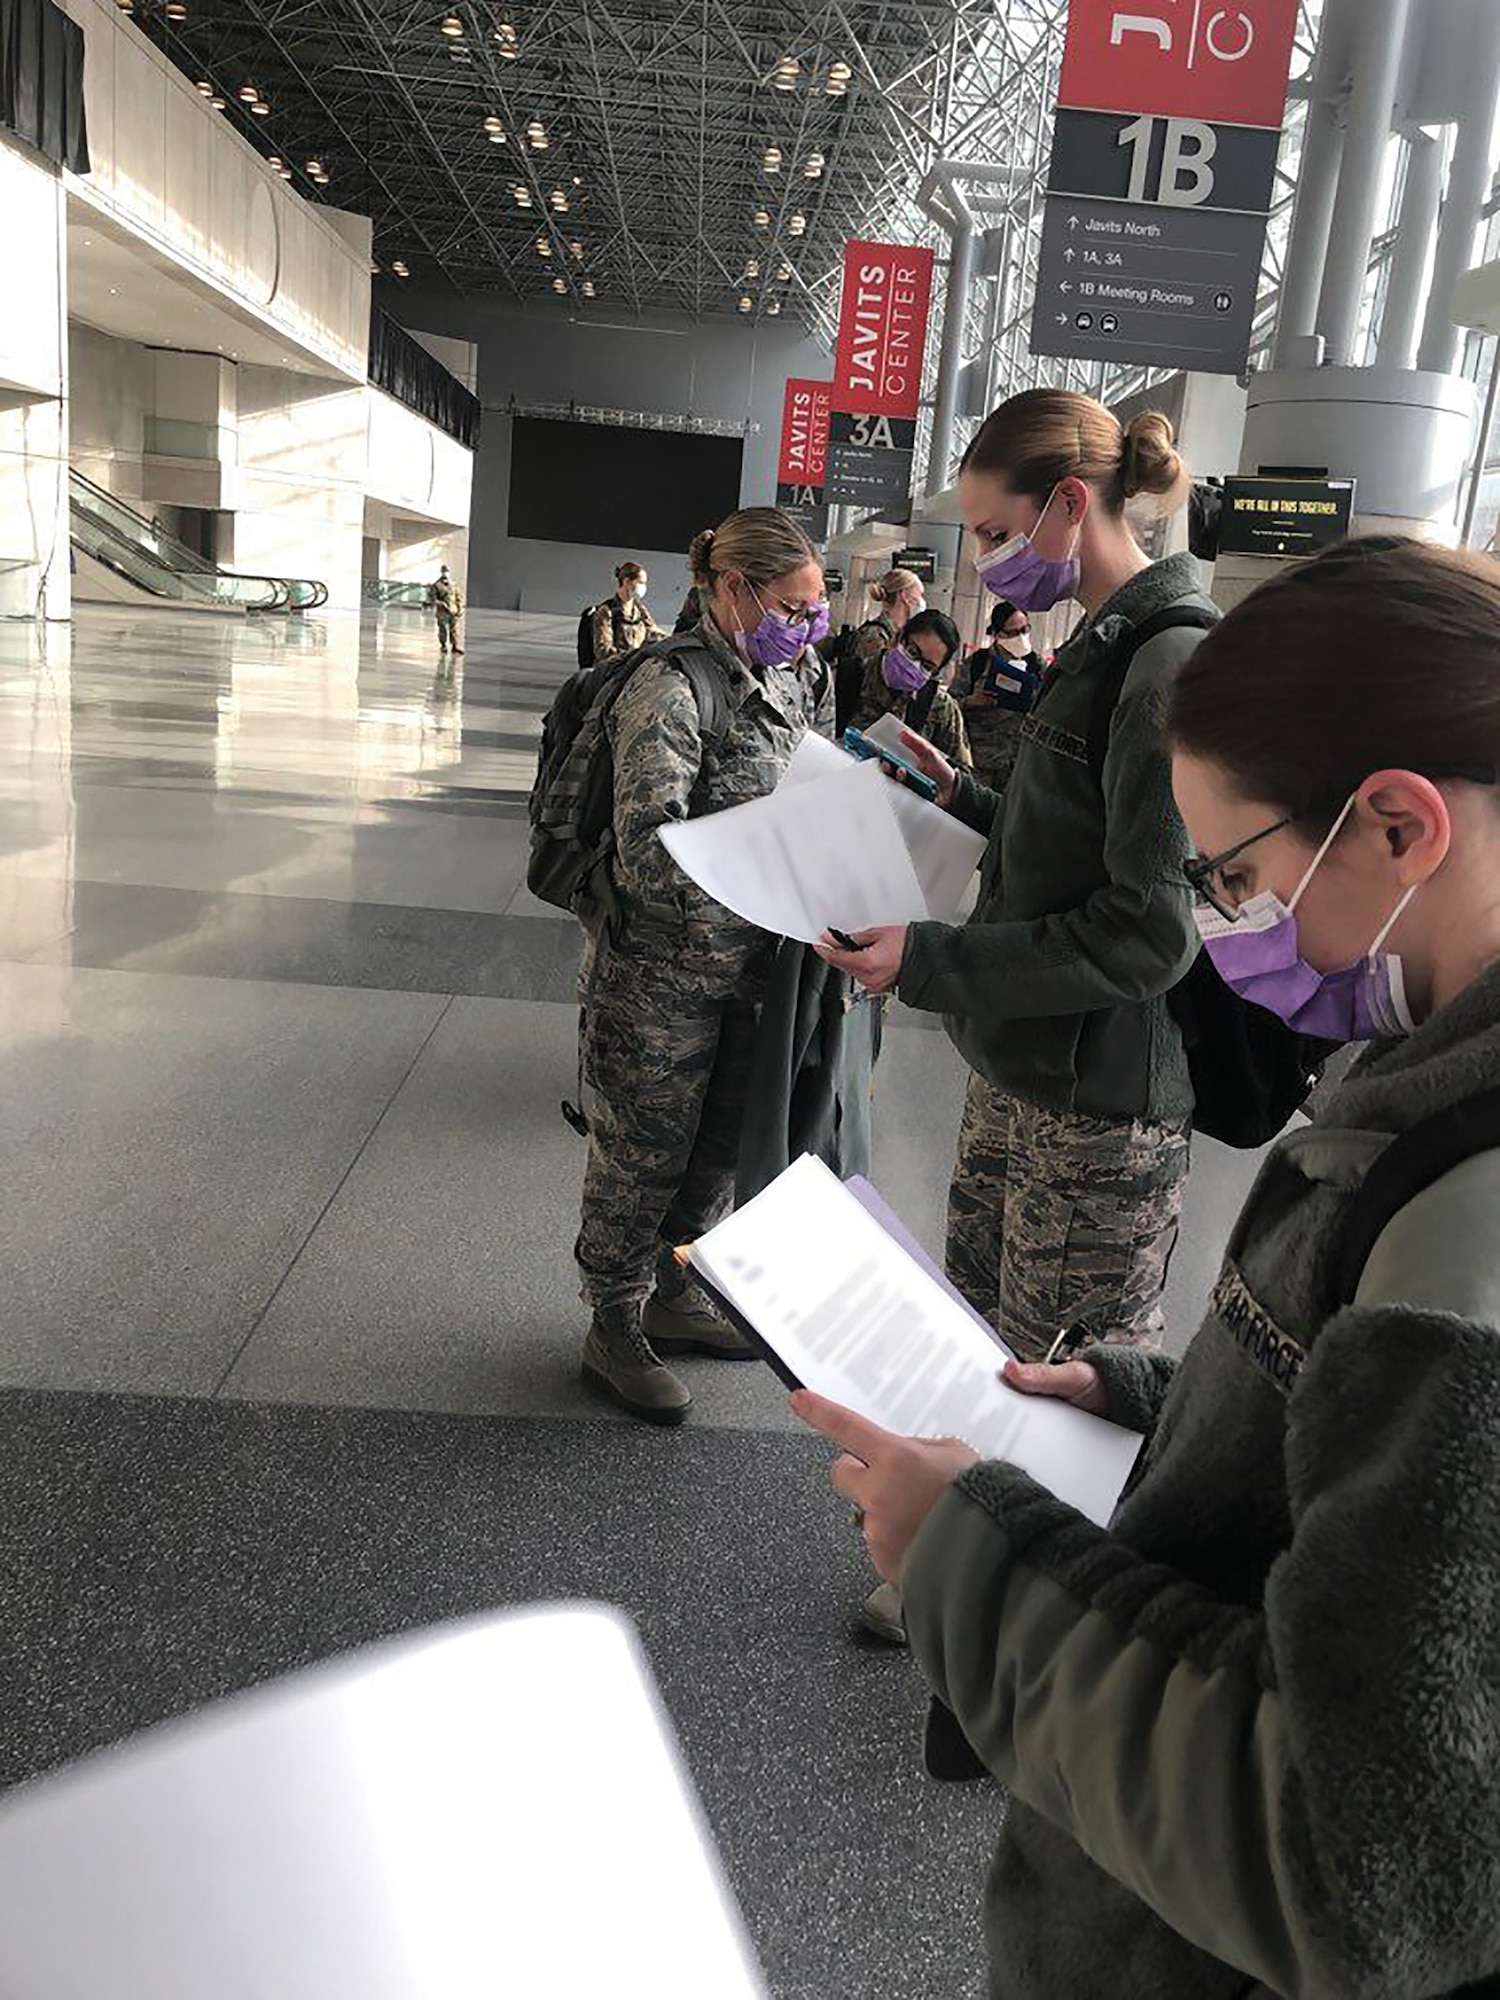 Seven Reserve Citizen Airmen from the 445th Aerospace Medicine and 445th Aeromedical Staging Squadrons in-process April 7, 2020 after deploying to Manhattan, New York City, where they are joining medical professionals from the civilian sector and all components of the armed services in response to COVID-19. The doctor, nurse practitioner and five nurses left Ohio April 5, 2020 and will be working in the Jacob K. Javits Center, a 2.1-million-square-foot convention center converted into a makeshift hospital in Manhattan, New York City. The 24-hour field hospital currently boasts 3,000 beds solely for individuals potentially exposed to, or confirmed ill with, COVID-19.